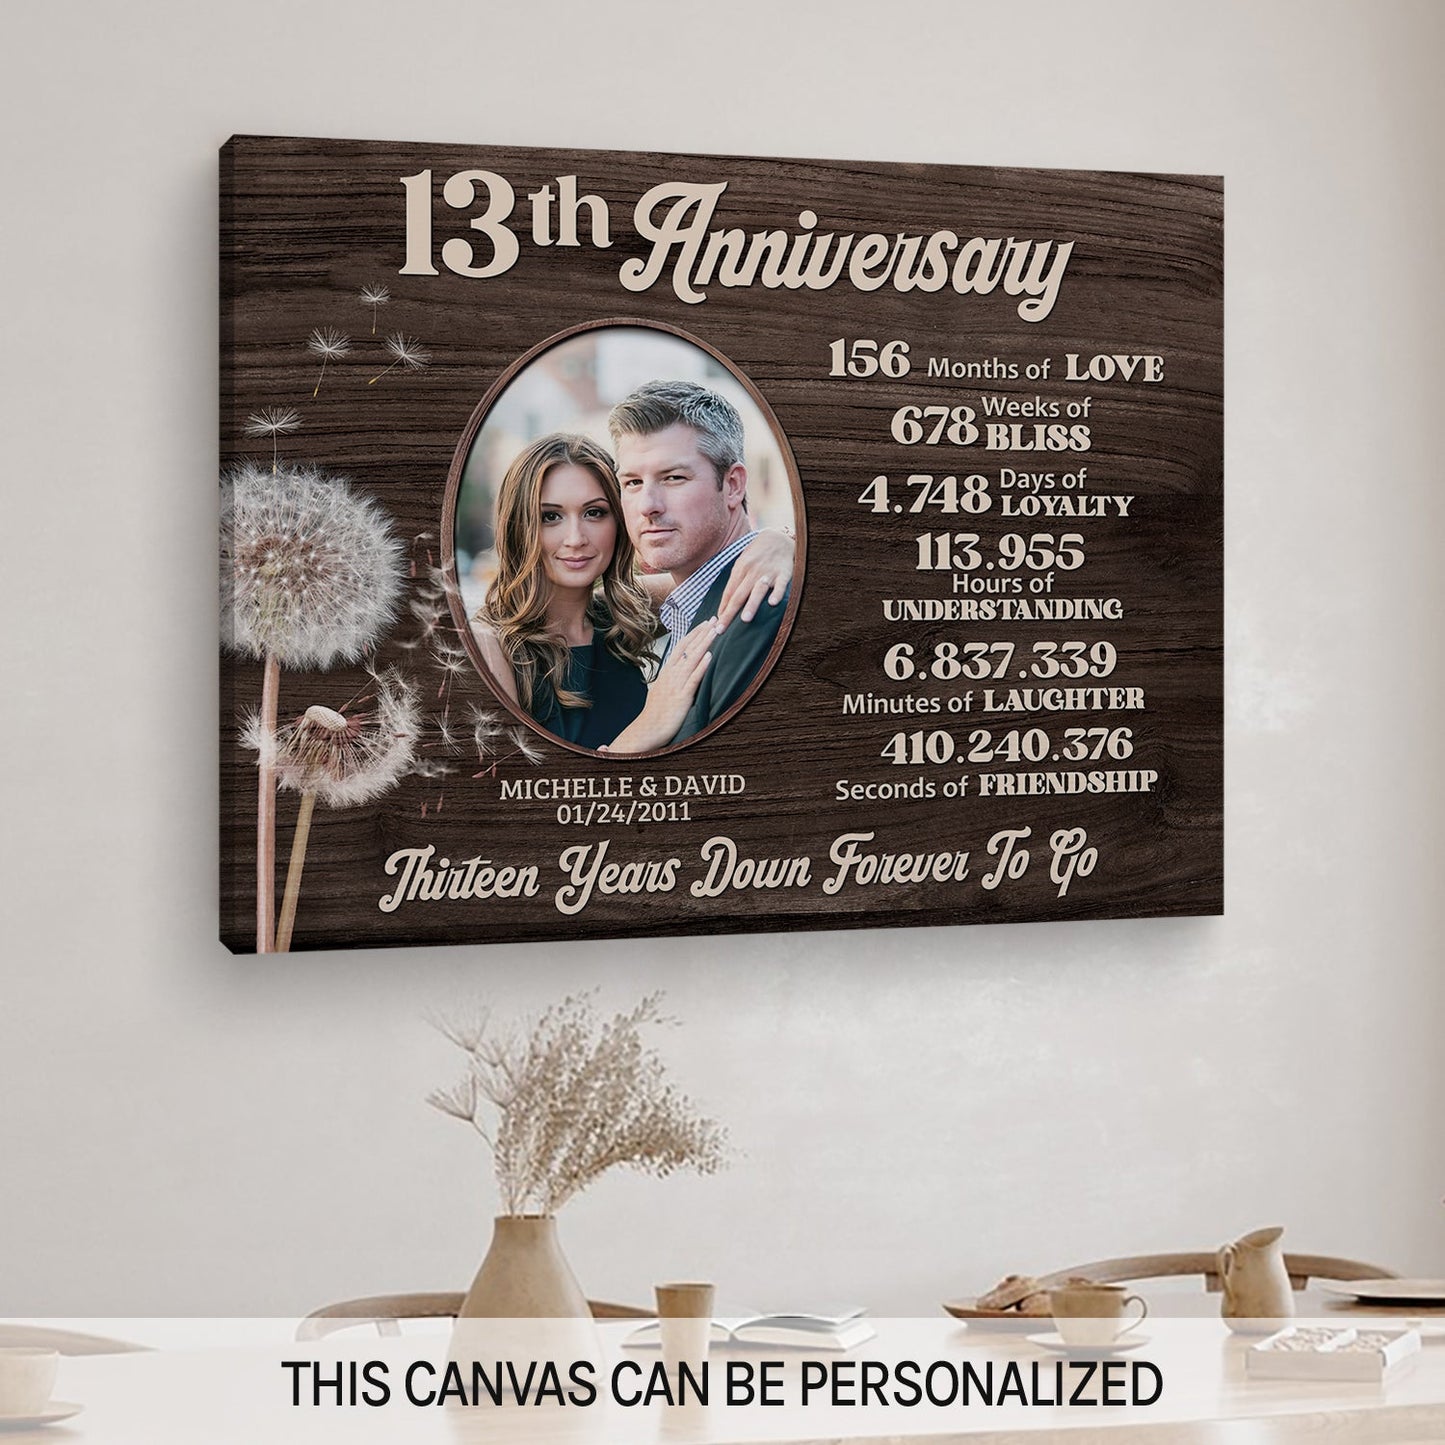 13th Anniversary - Personalized 13 Year Anniversary gift For Husband or Wife - Custom Canvas Print - MyMindfulGifts